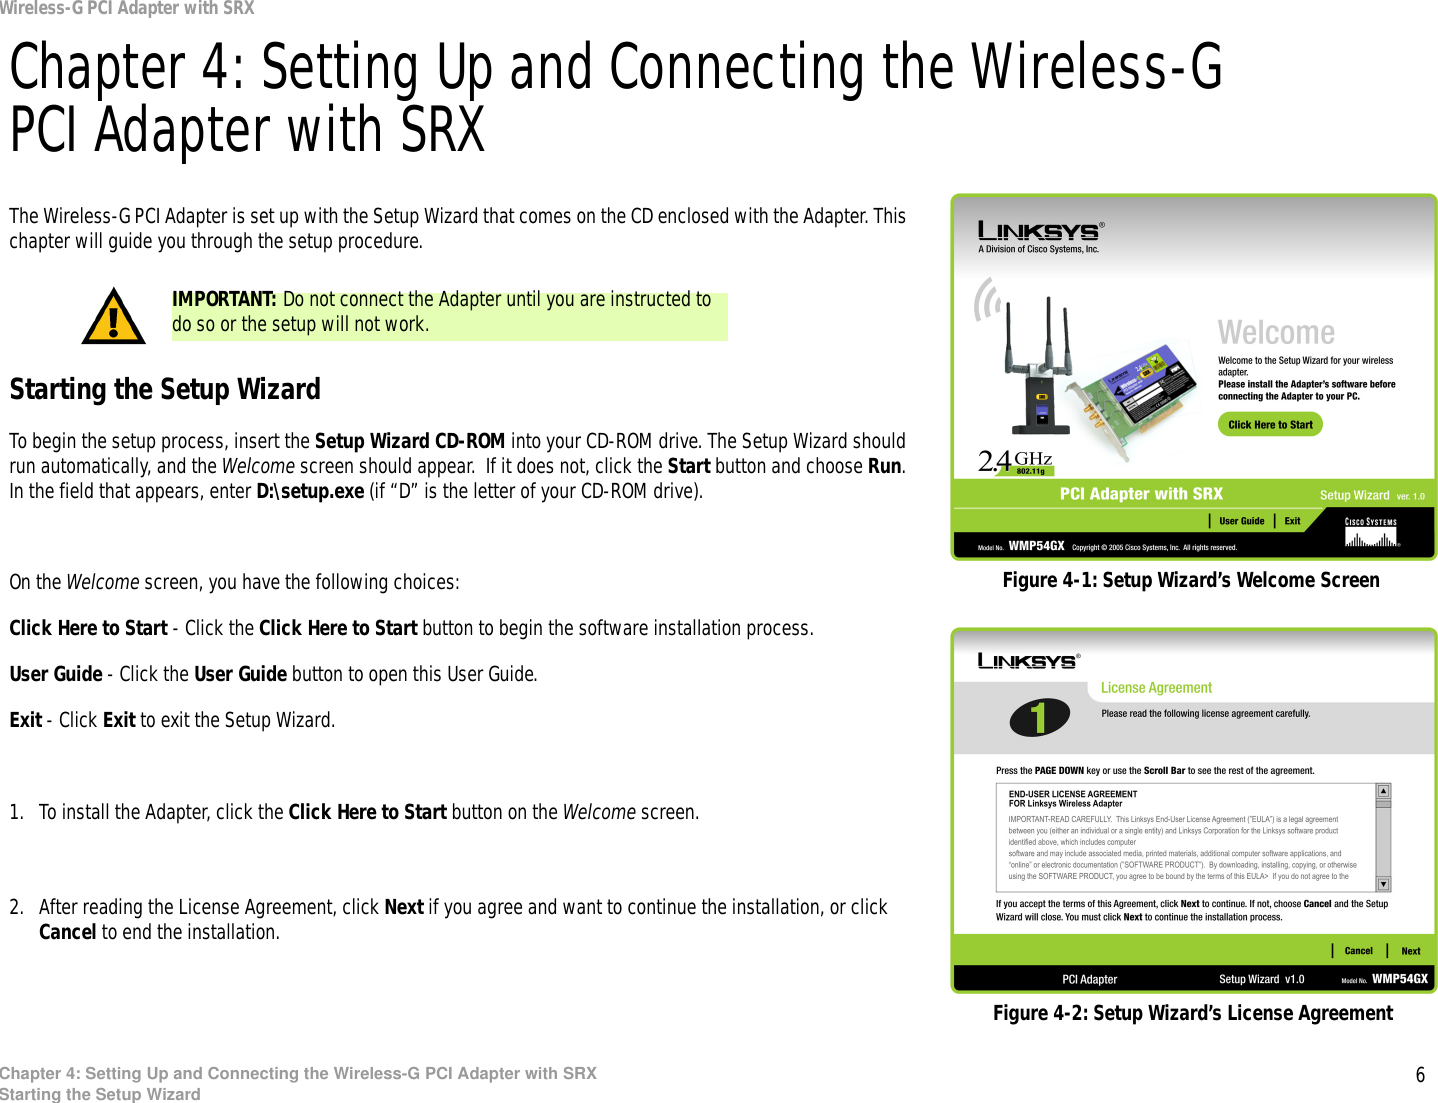 6Chapter 4: Setting Up and Connecting the Wireless-G PCI Adapter with SRXStarting the Setup WizardWireless-G PCI Adapter with SRXChapter 4: Setting Up and Connecting the Wireless-G PCI Adapter with SRXThe Wireless-G PCI Adapter is set up with the Setup Wizard that comes on the CD enclosed with the Adapter. This chapter will guide you through the setup procedure. Starting the Setup WizardTo begin the setup process, insert the Setup Wizard CD-ROM into your CD-ROM drive. The Setup Wizard should run automatically, and the Welcome screen should appear.  If it does not, click the Start button and choose Run. In the field that appears, enter D:\setup.exe (if “D” is the letter of your CD-ROM drive). On the Welcome screen, you have the following choices:Click Here to Start - Click the Click Here to Start button to begin the software installation process. User Guide - Click the User Guide button to open this User Guide. Exit - Click Exit to exit the Setup Wizard.1. To install the Adapter, click the Click Here to Start button on the Welcome screen.2. After reading the License Agreement, click Next if you agree and want to continue the installation, or click Cancel to end the installation.Figure 4-1: Setup Wizard’s Welcome ScreenFigure 4-2: Setup Wizard’s License AgreementIMPORTANT: Do not connect the Adapter until you are instructed to do so or the setup will not work.